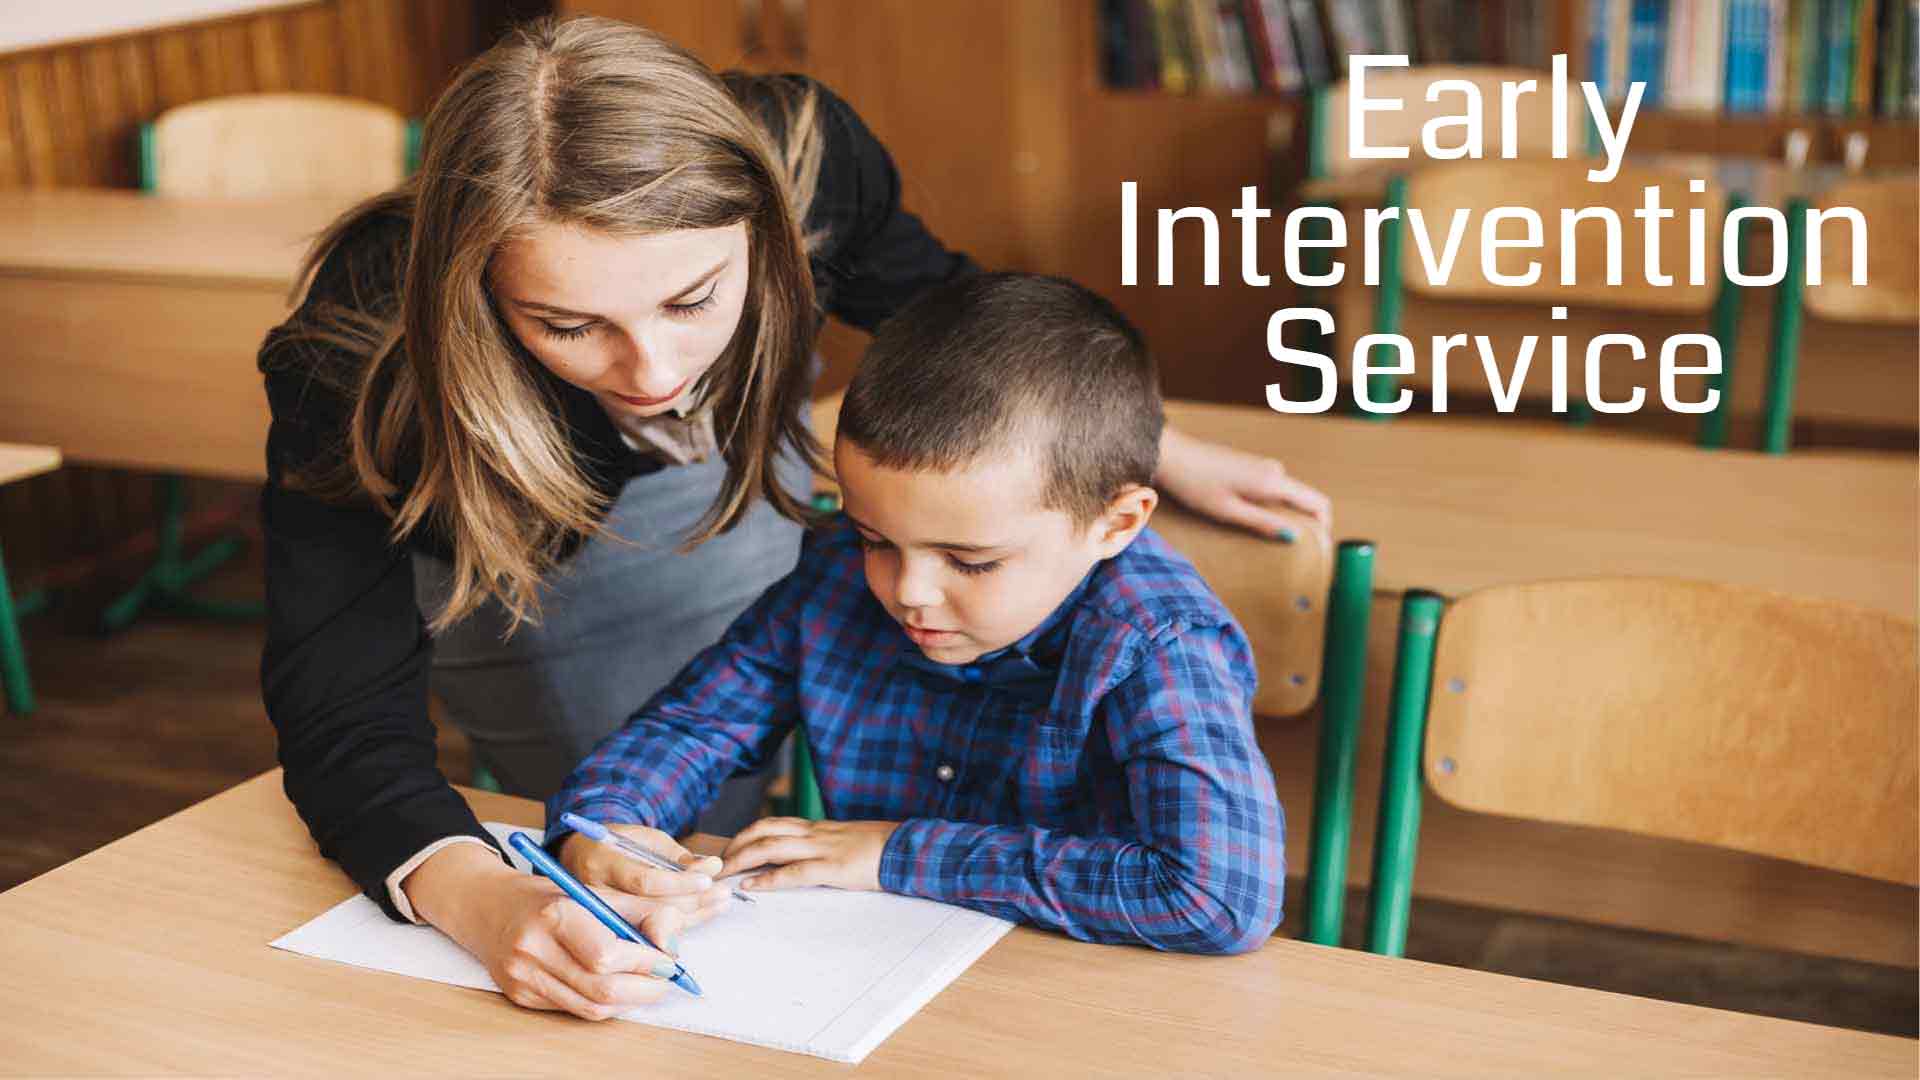 early intervention service in nagpur,early intervention service